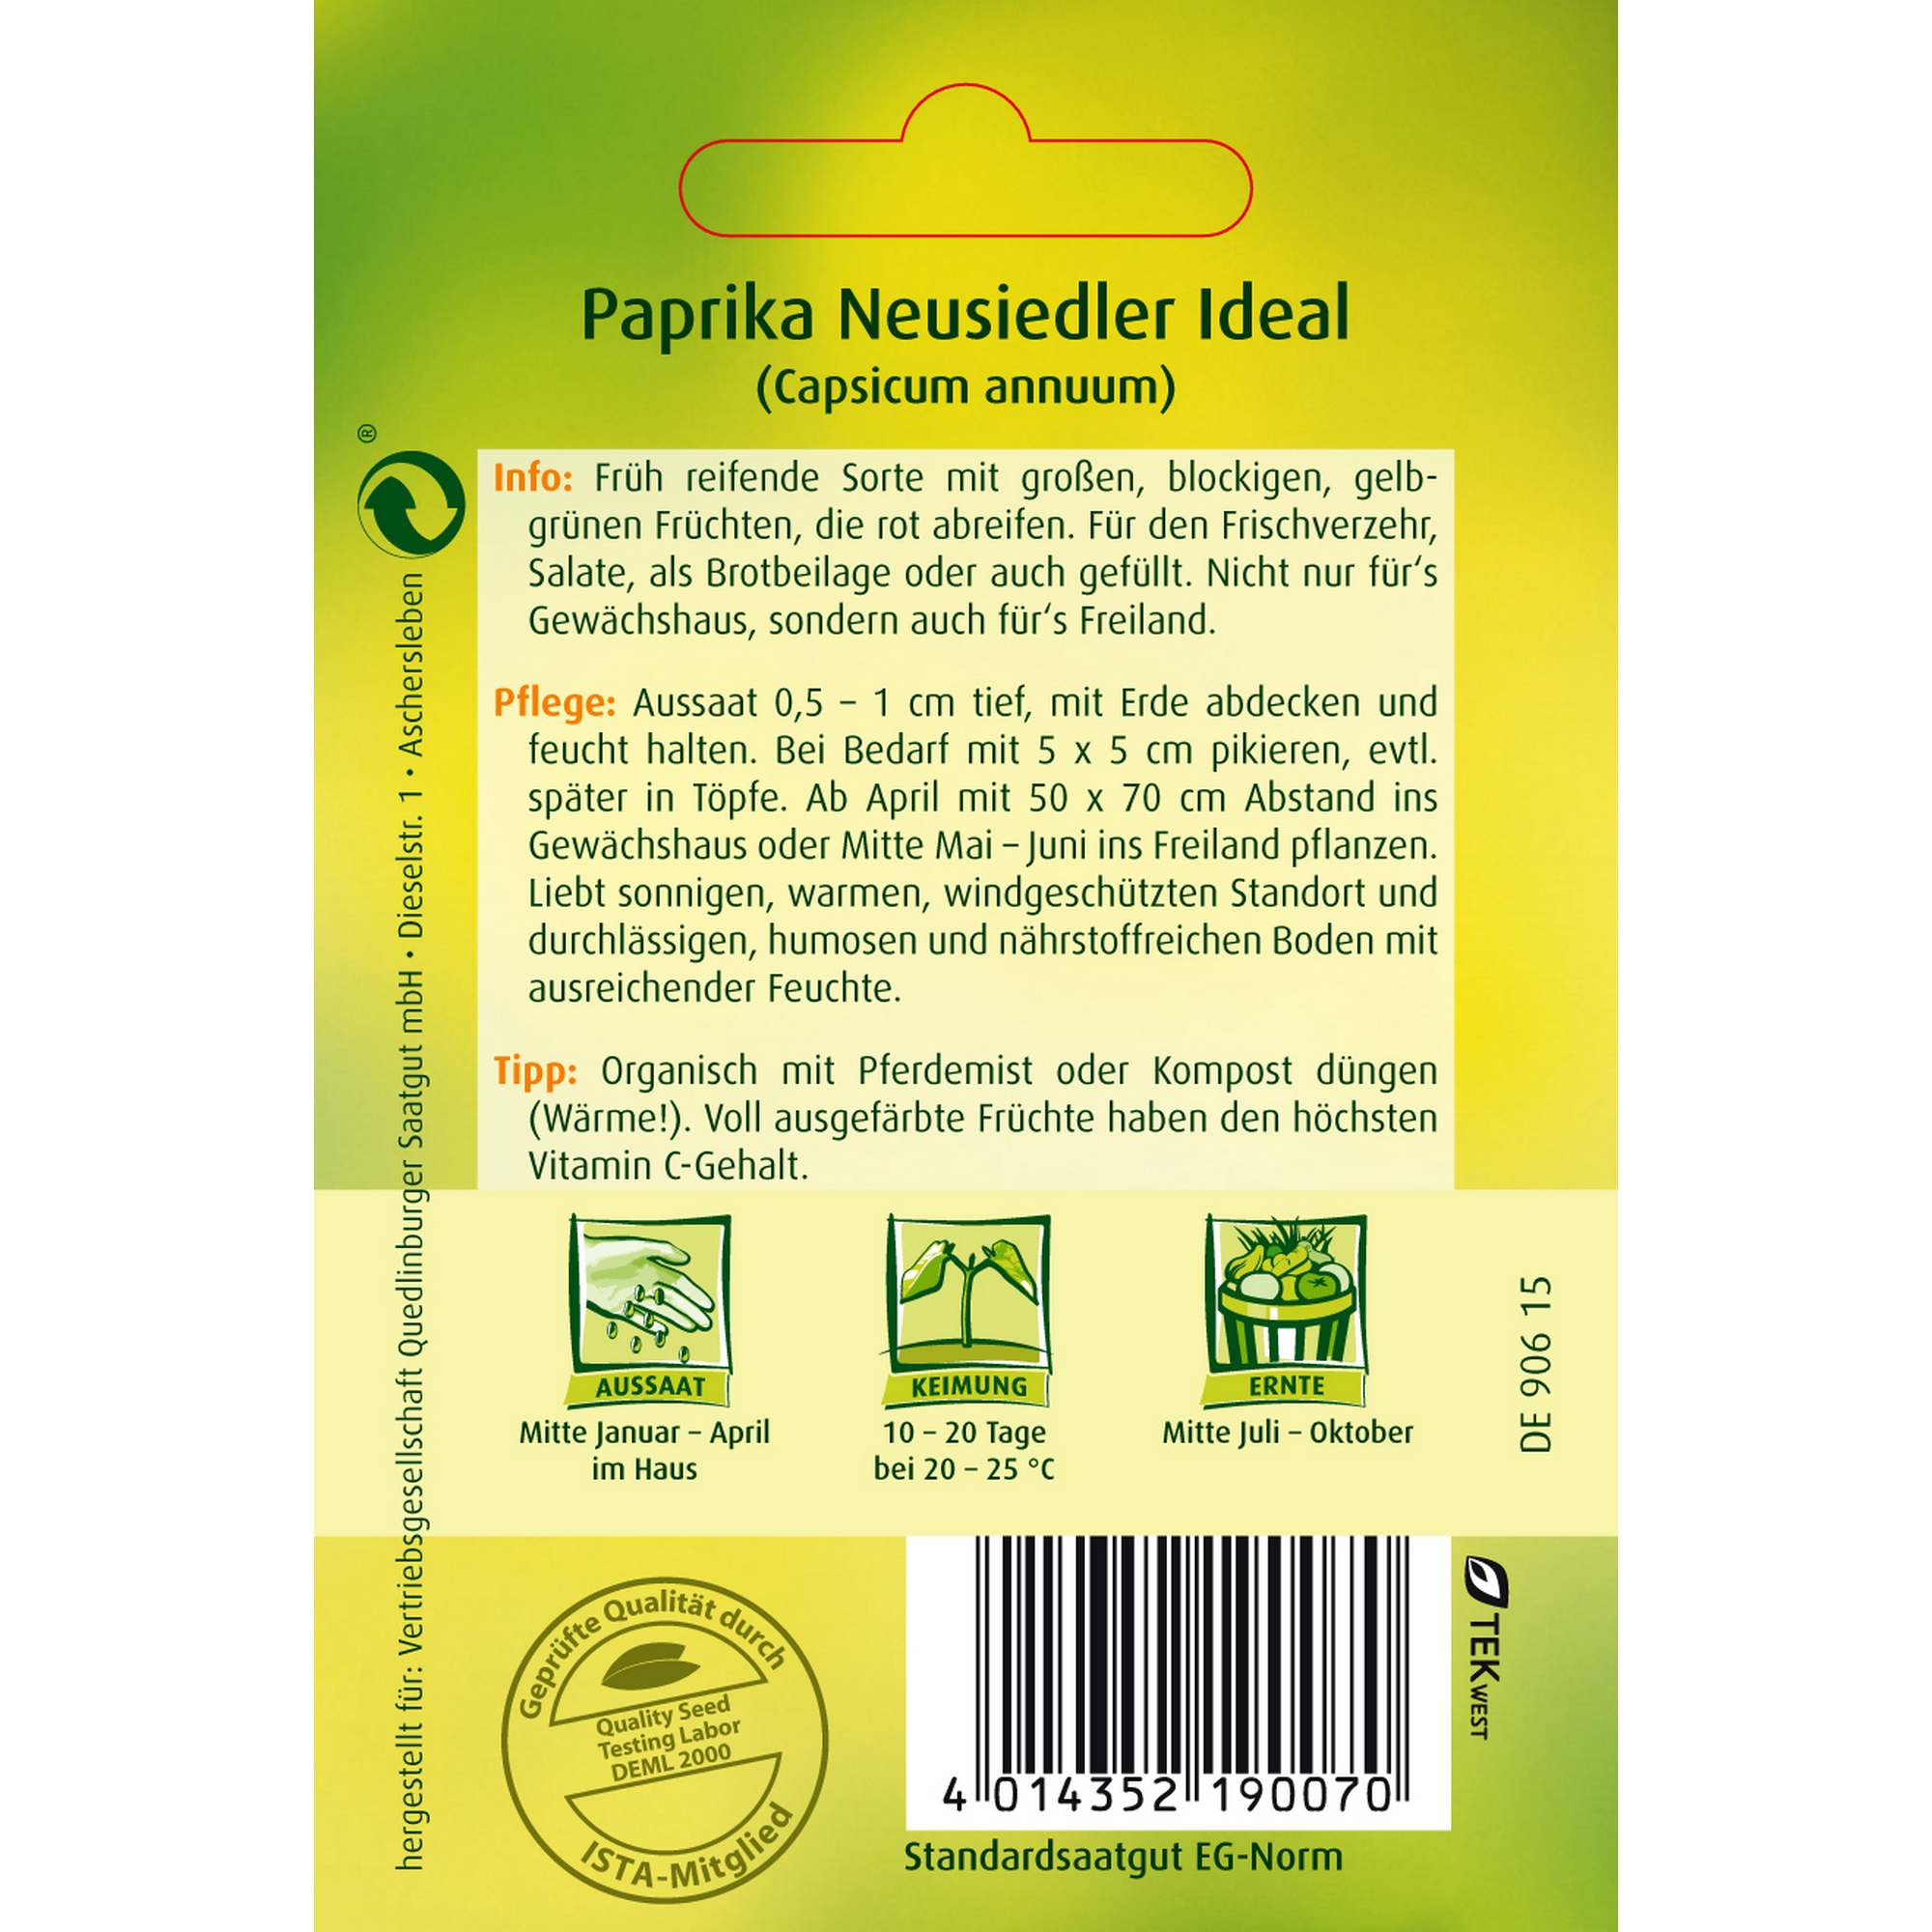 Paprika 'Neusiedler Ideal' + product picture